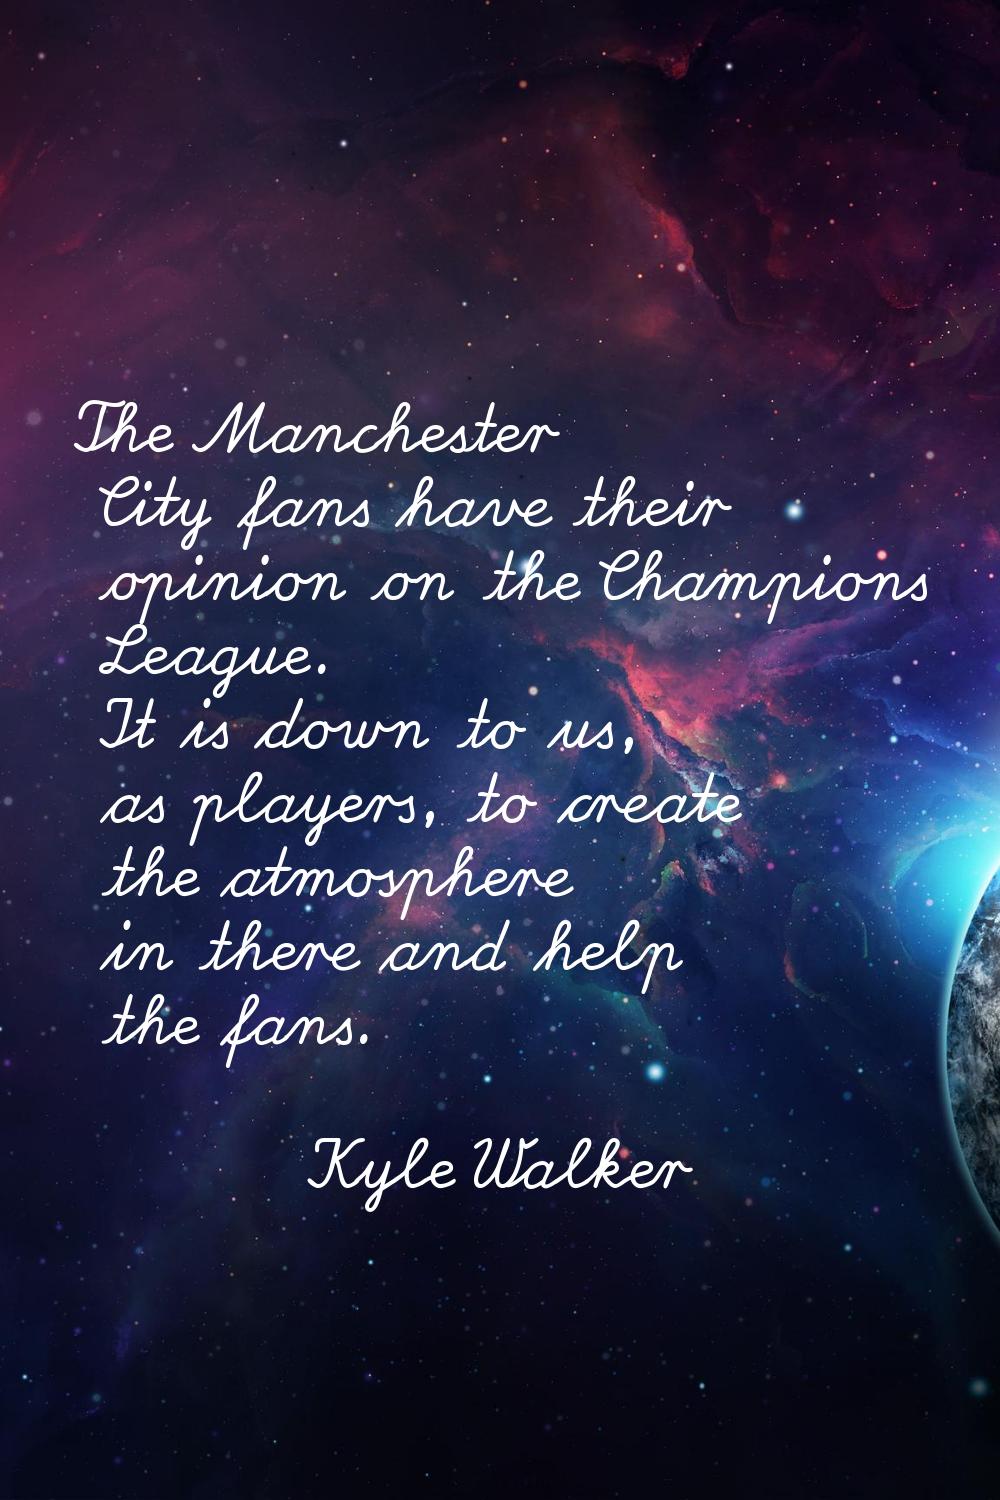 The Manchester City fans have their opinion on the Champions League. It is down to us, as players, 